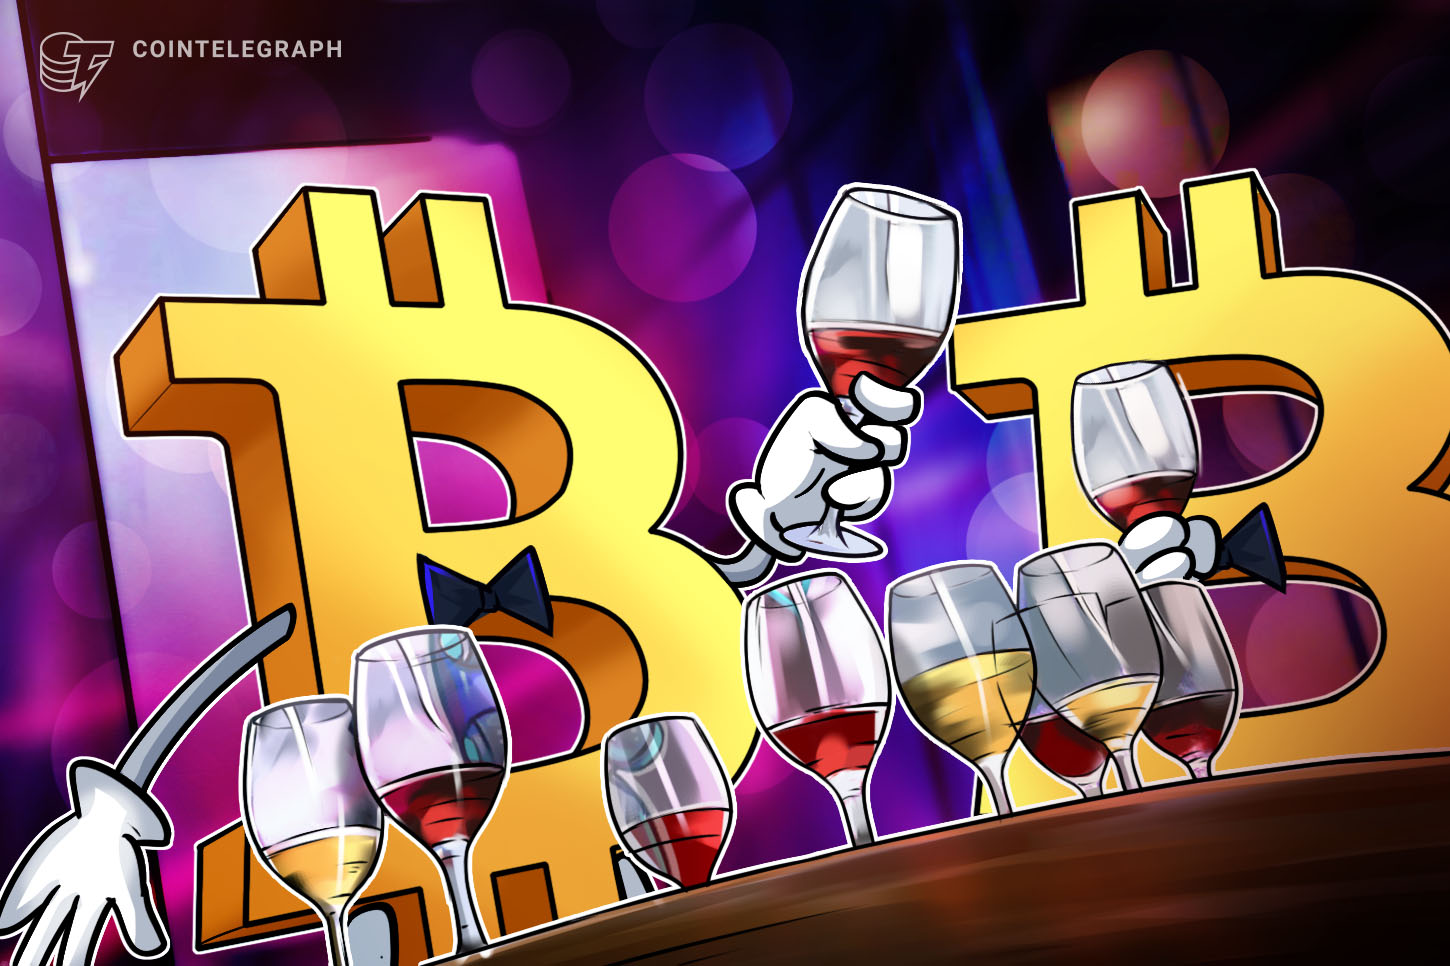 The bar owner wants to sell two New York City irrigation slots for $ 1 million bitcoin